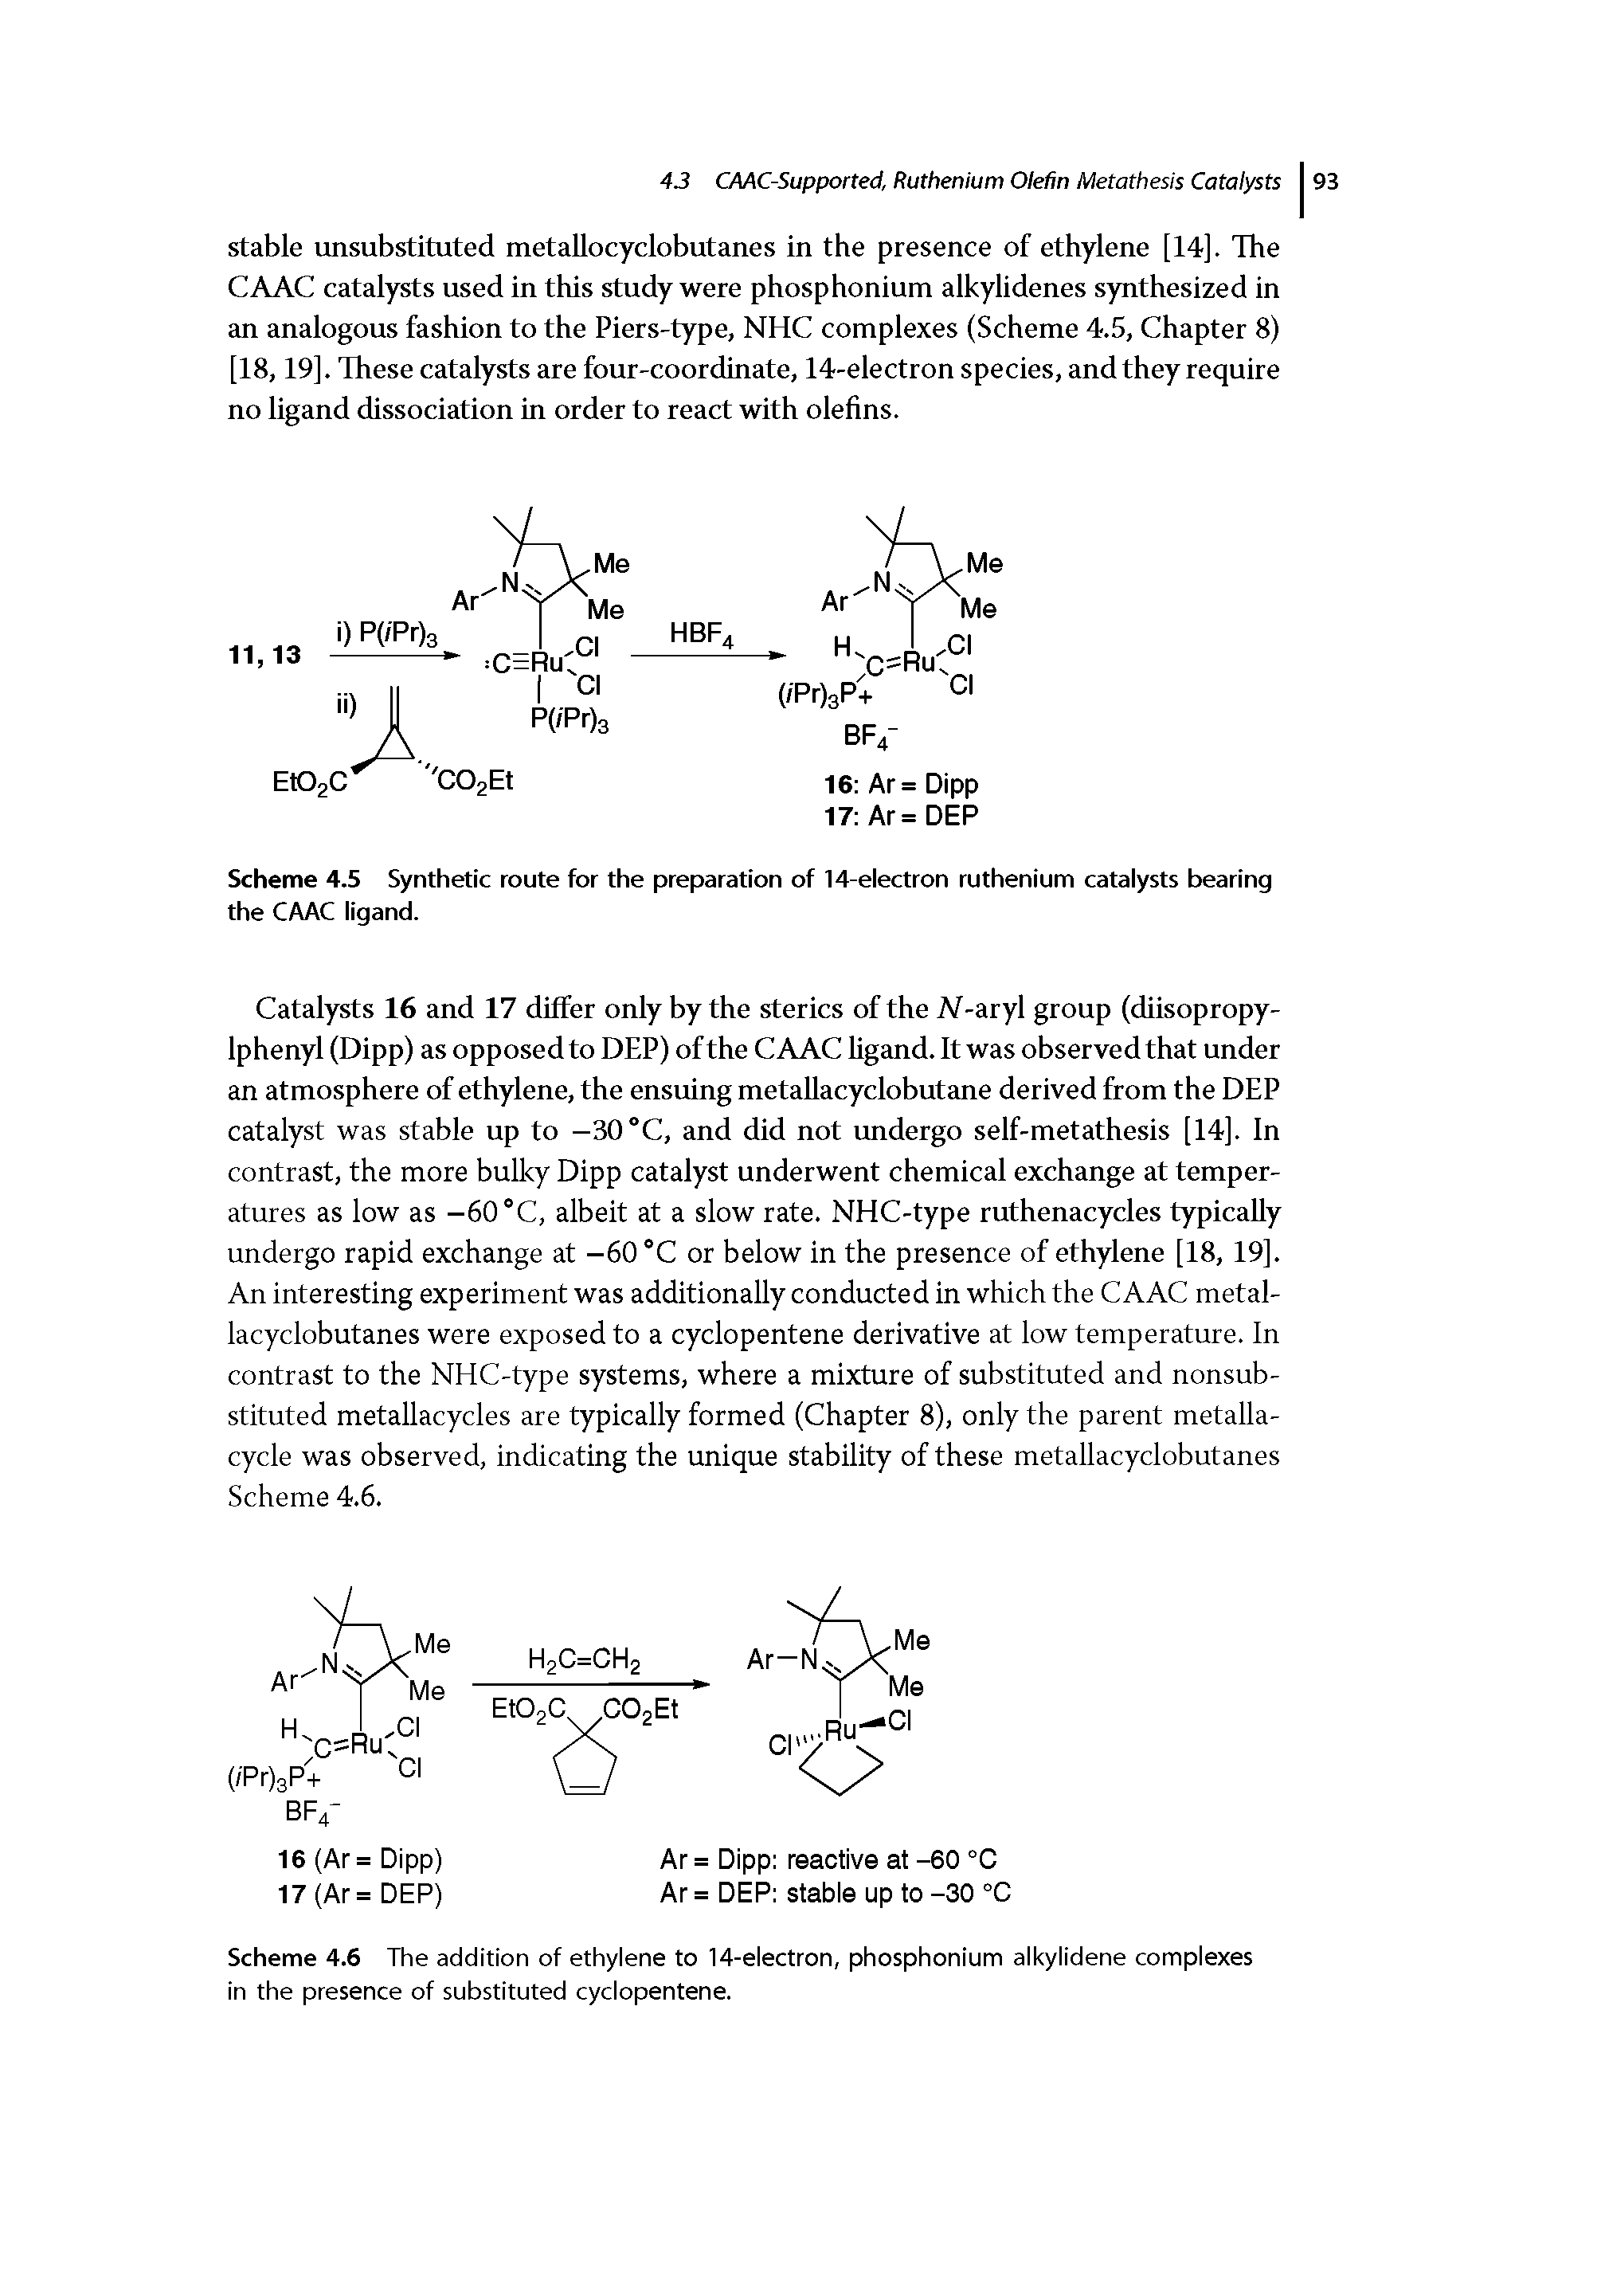 Scheme 4.5 Synthetic route for the preparation of 14-electron ruthenium catalysts bearing the CAAC ligand.